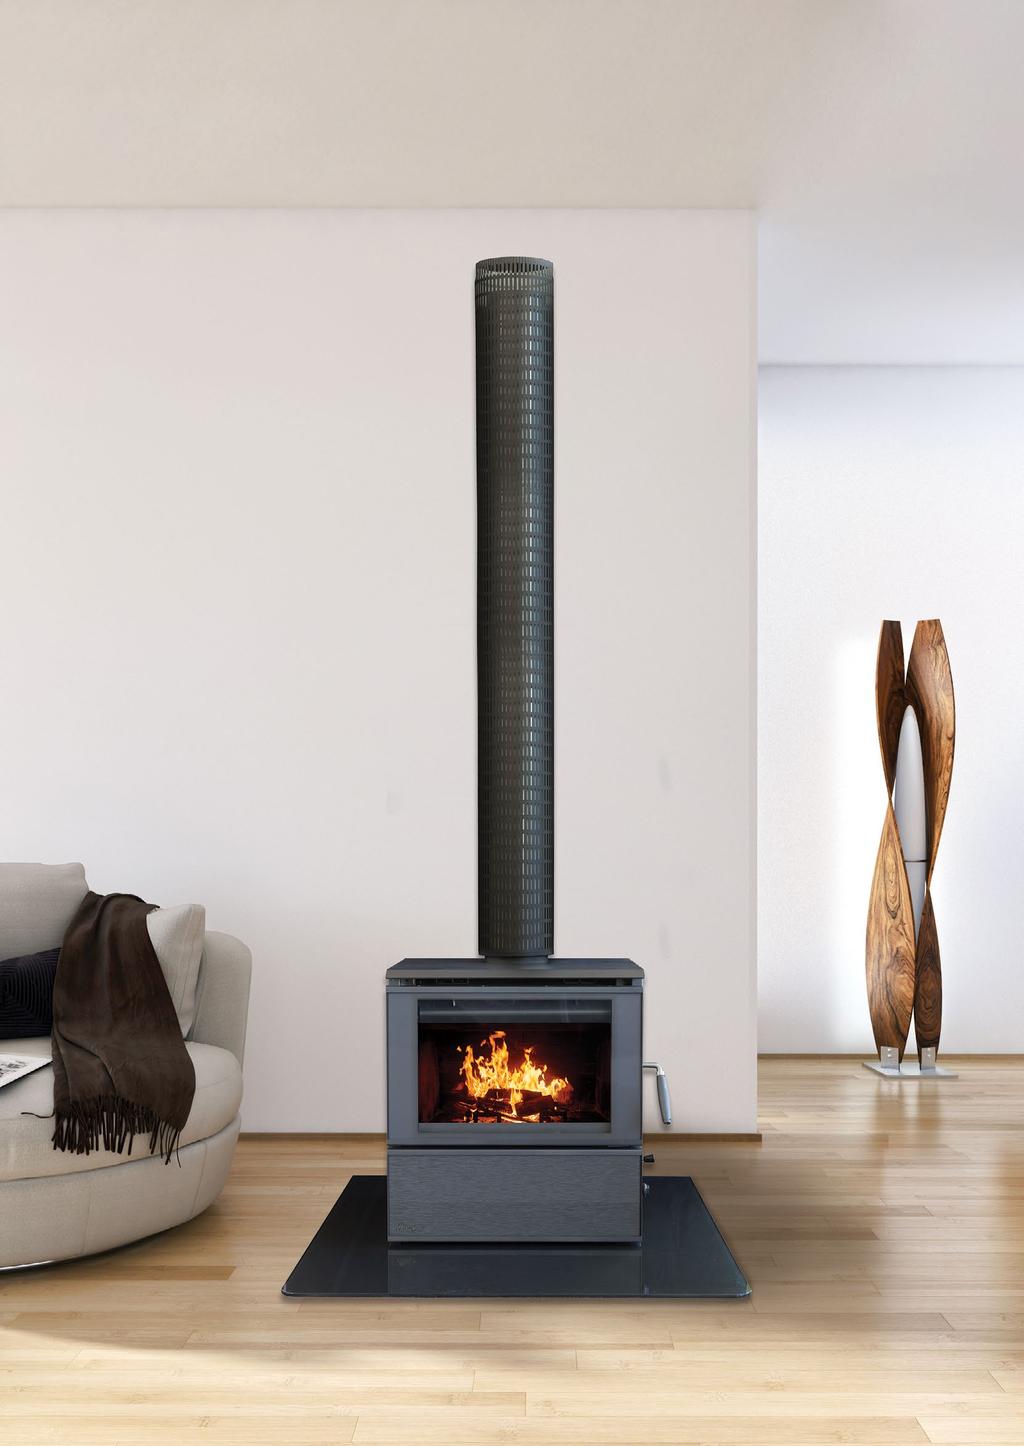 C-500 Console Series 8 This stylish + modern freestanding woodheater will enhance the look of any home. The C500 will comfortably and economically heat up to 24 squares* of open plan living.